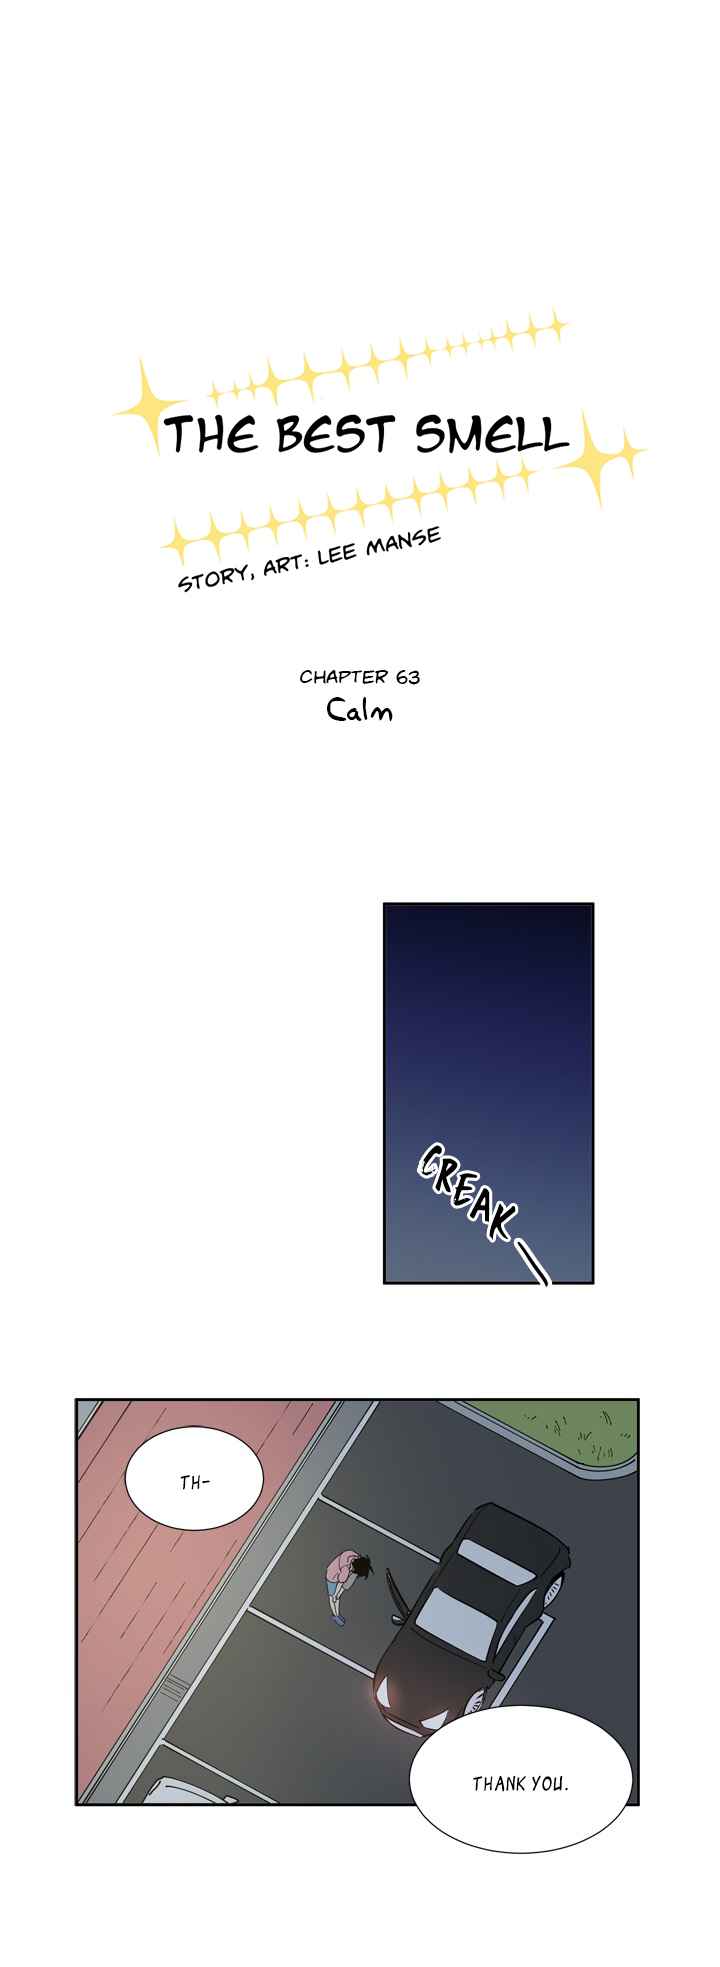 The Best Smell Ch. 63 Calm